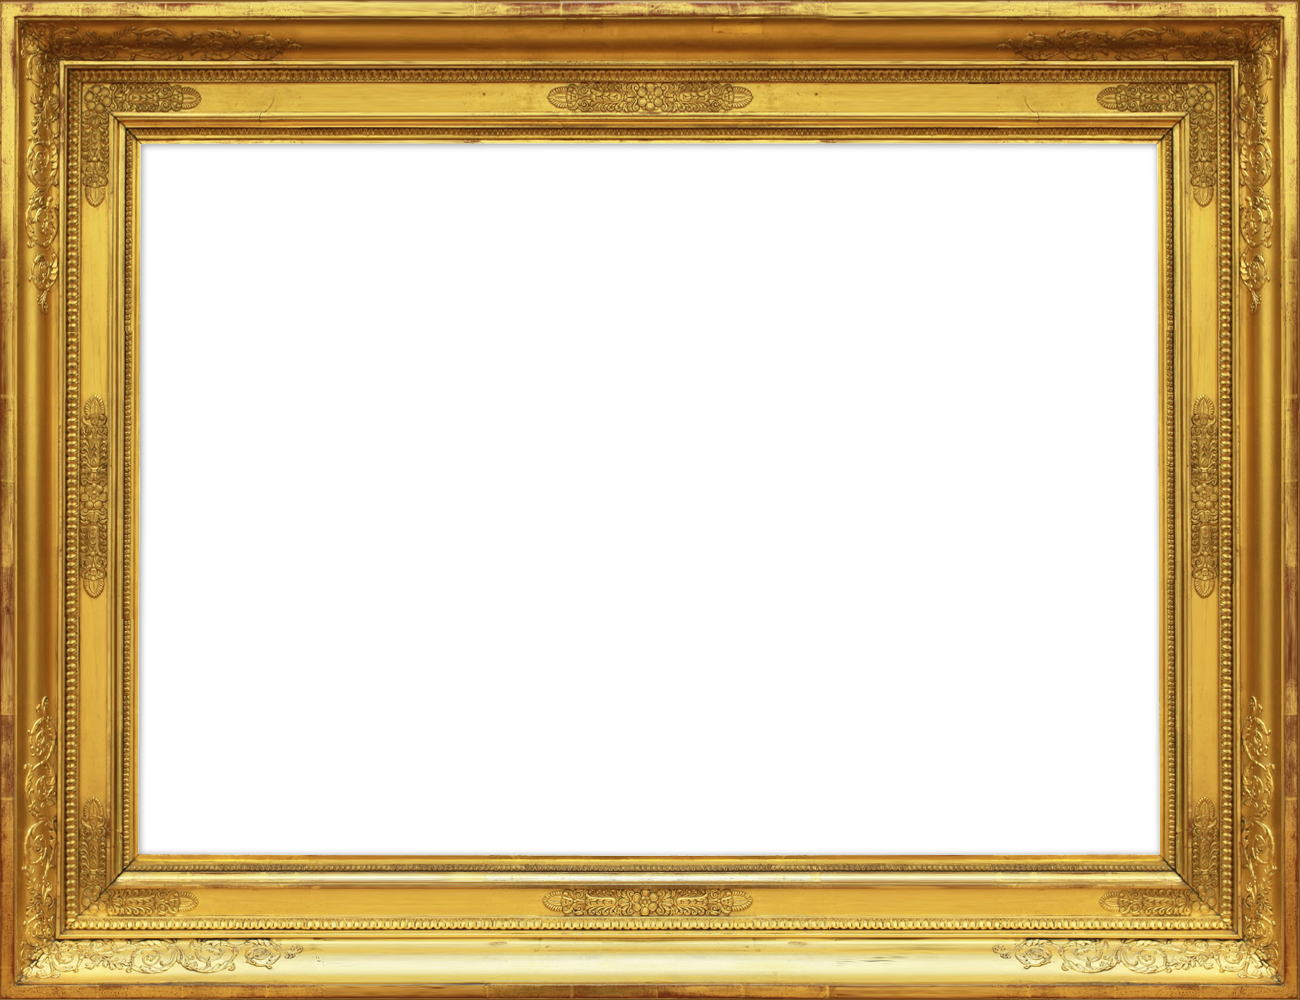 Decorative Picture Arts Layers Frame Decor Frames PNG Image